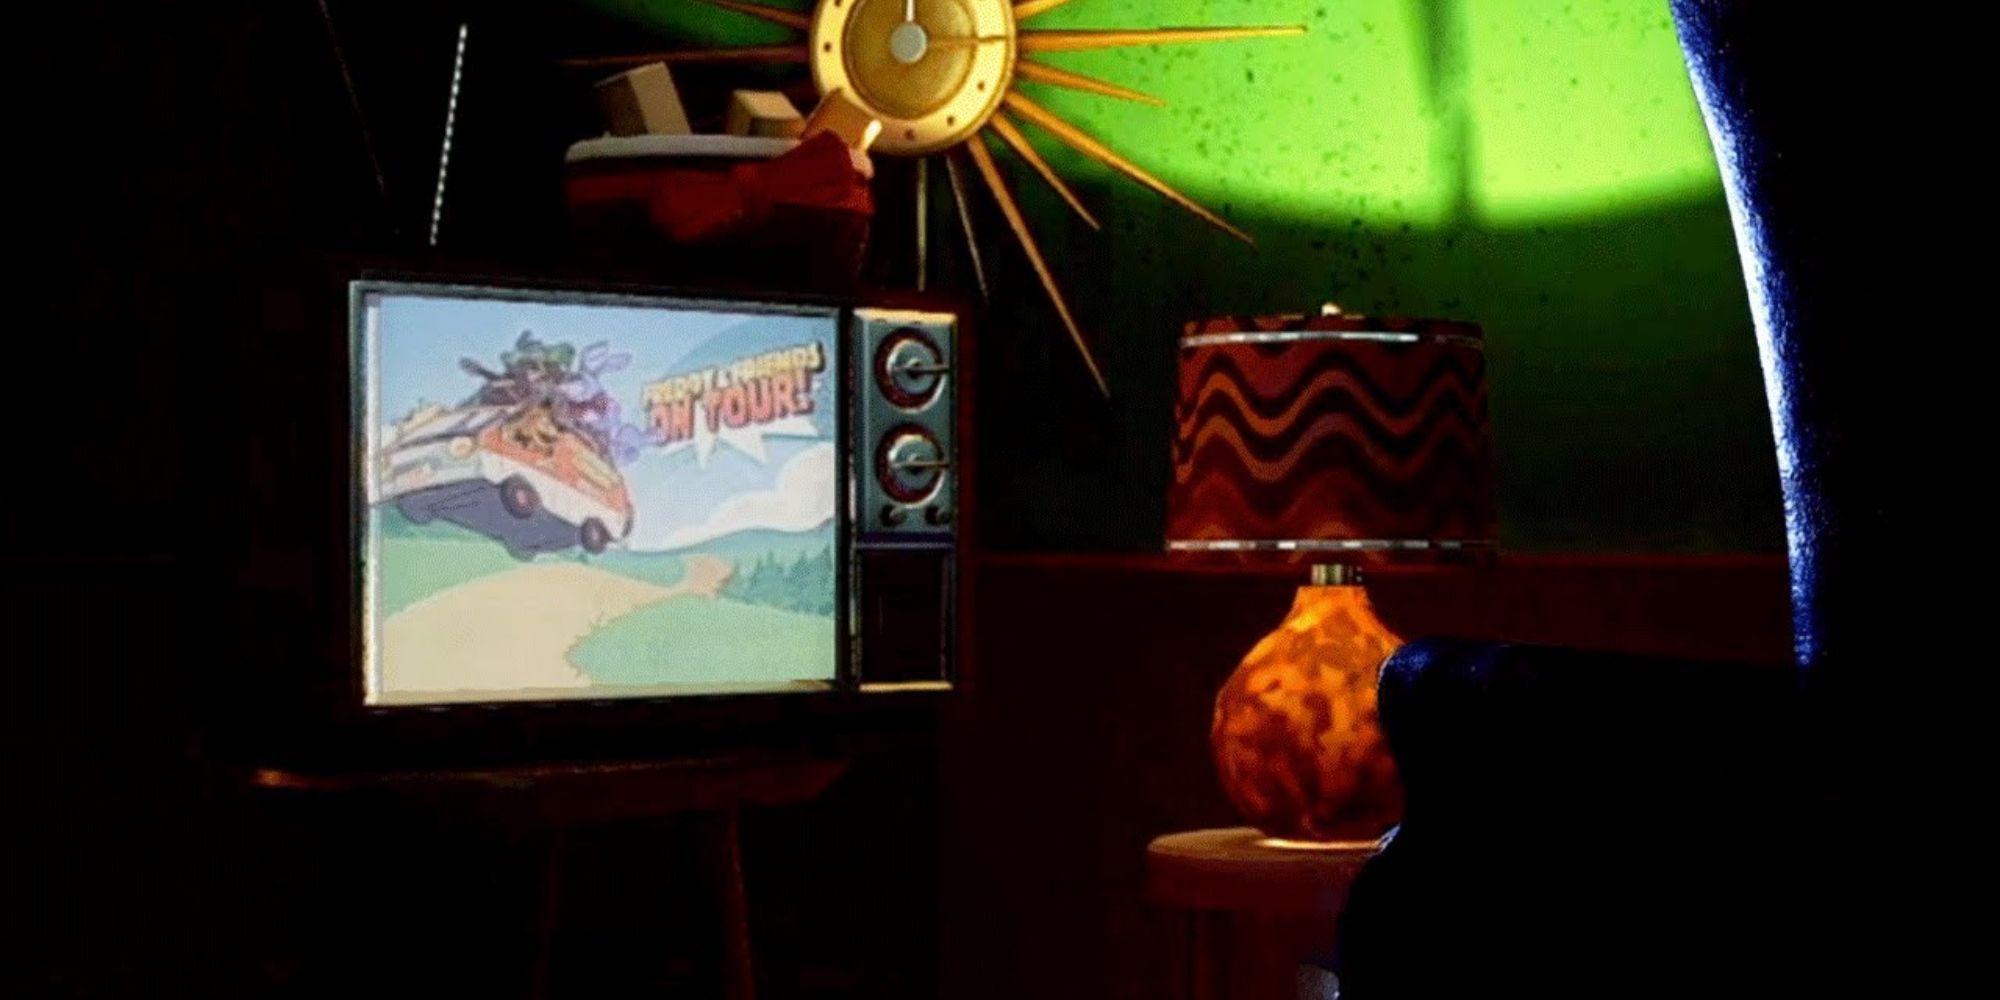 The TV in the secret room, showing the Freddy and Friends on Tour cartoon